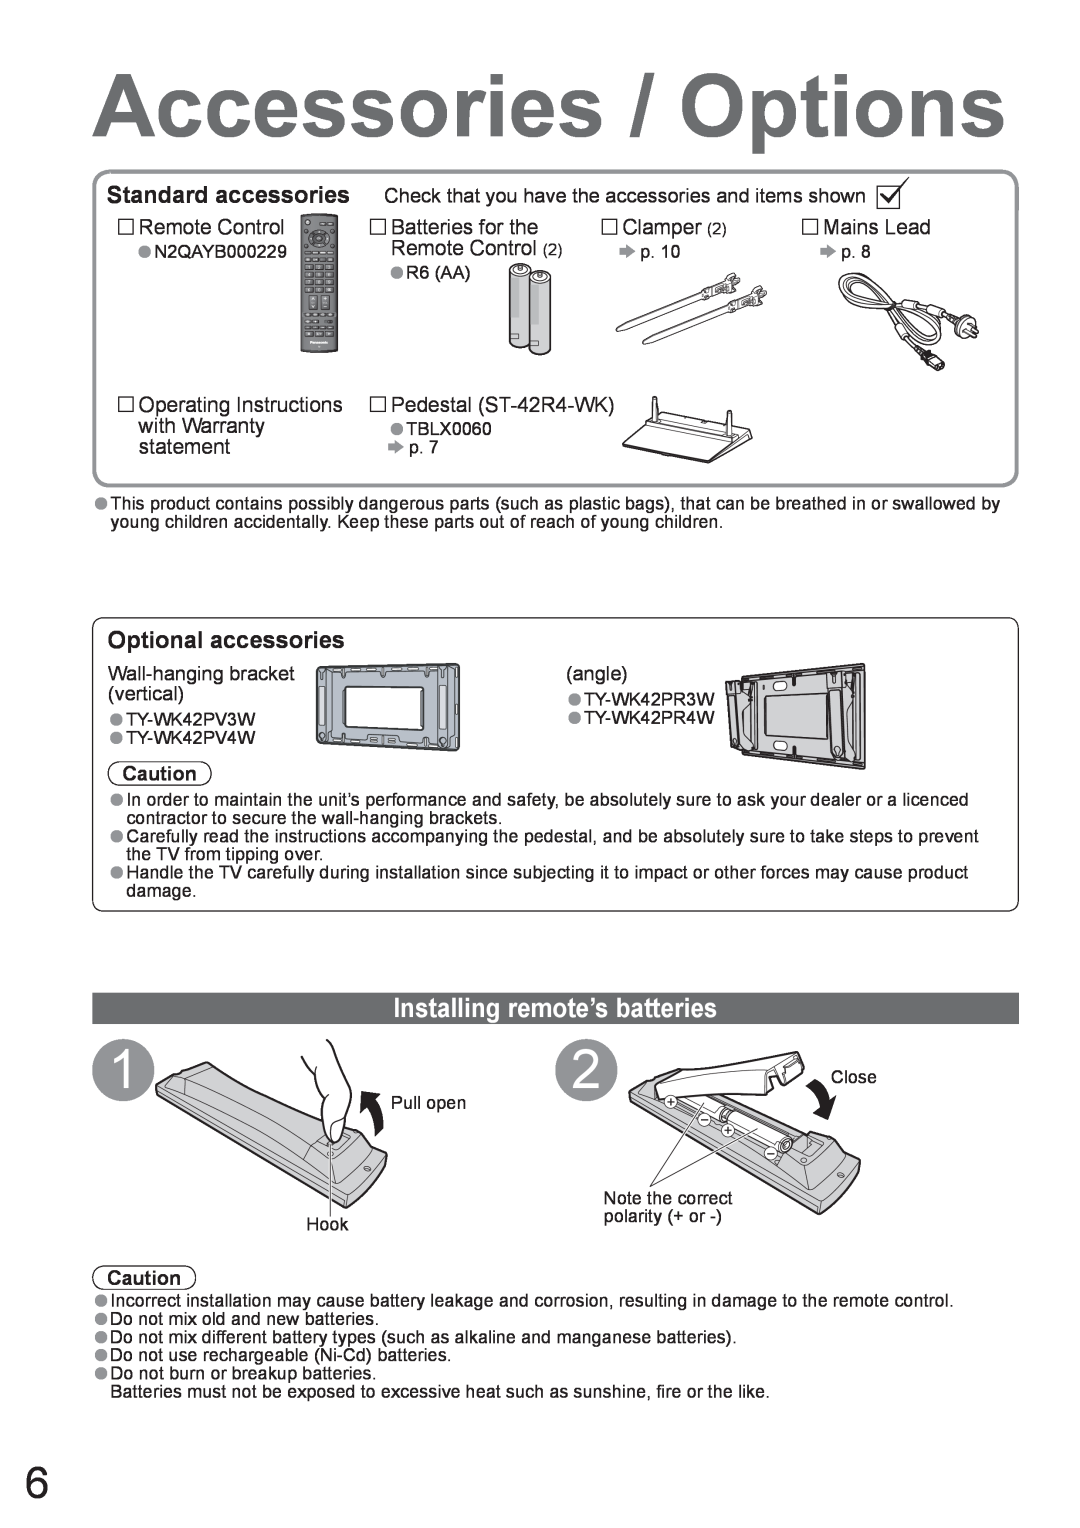 Panasonic TH-42PX8A Accessories / Options, Installing remote’s batteries, Optional accessories, Remote Control, Clamper 